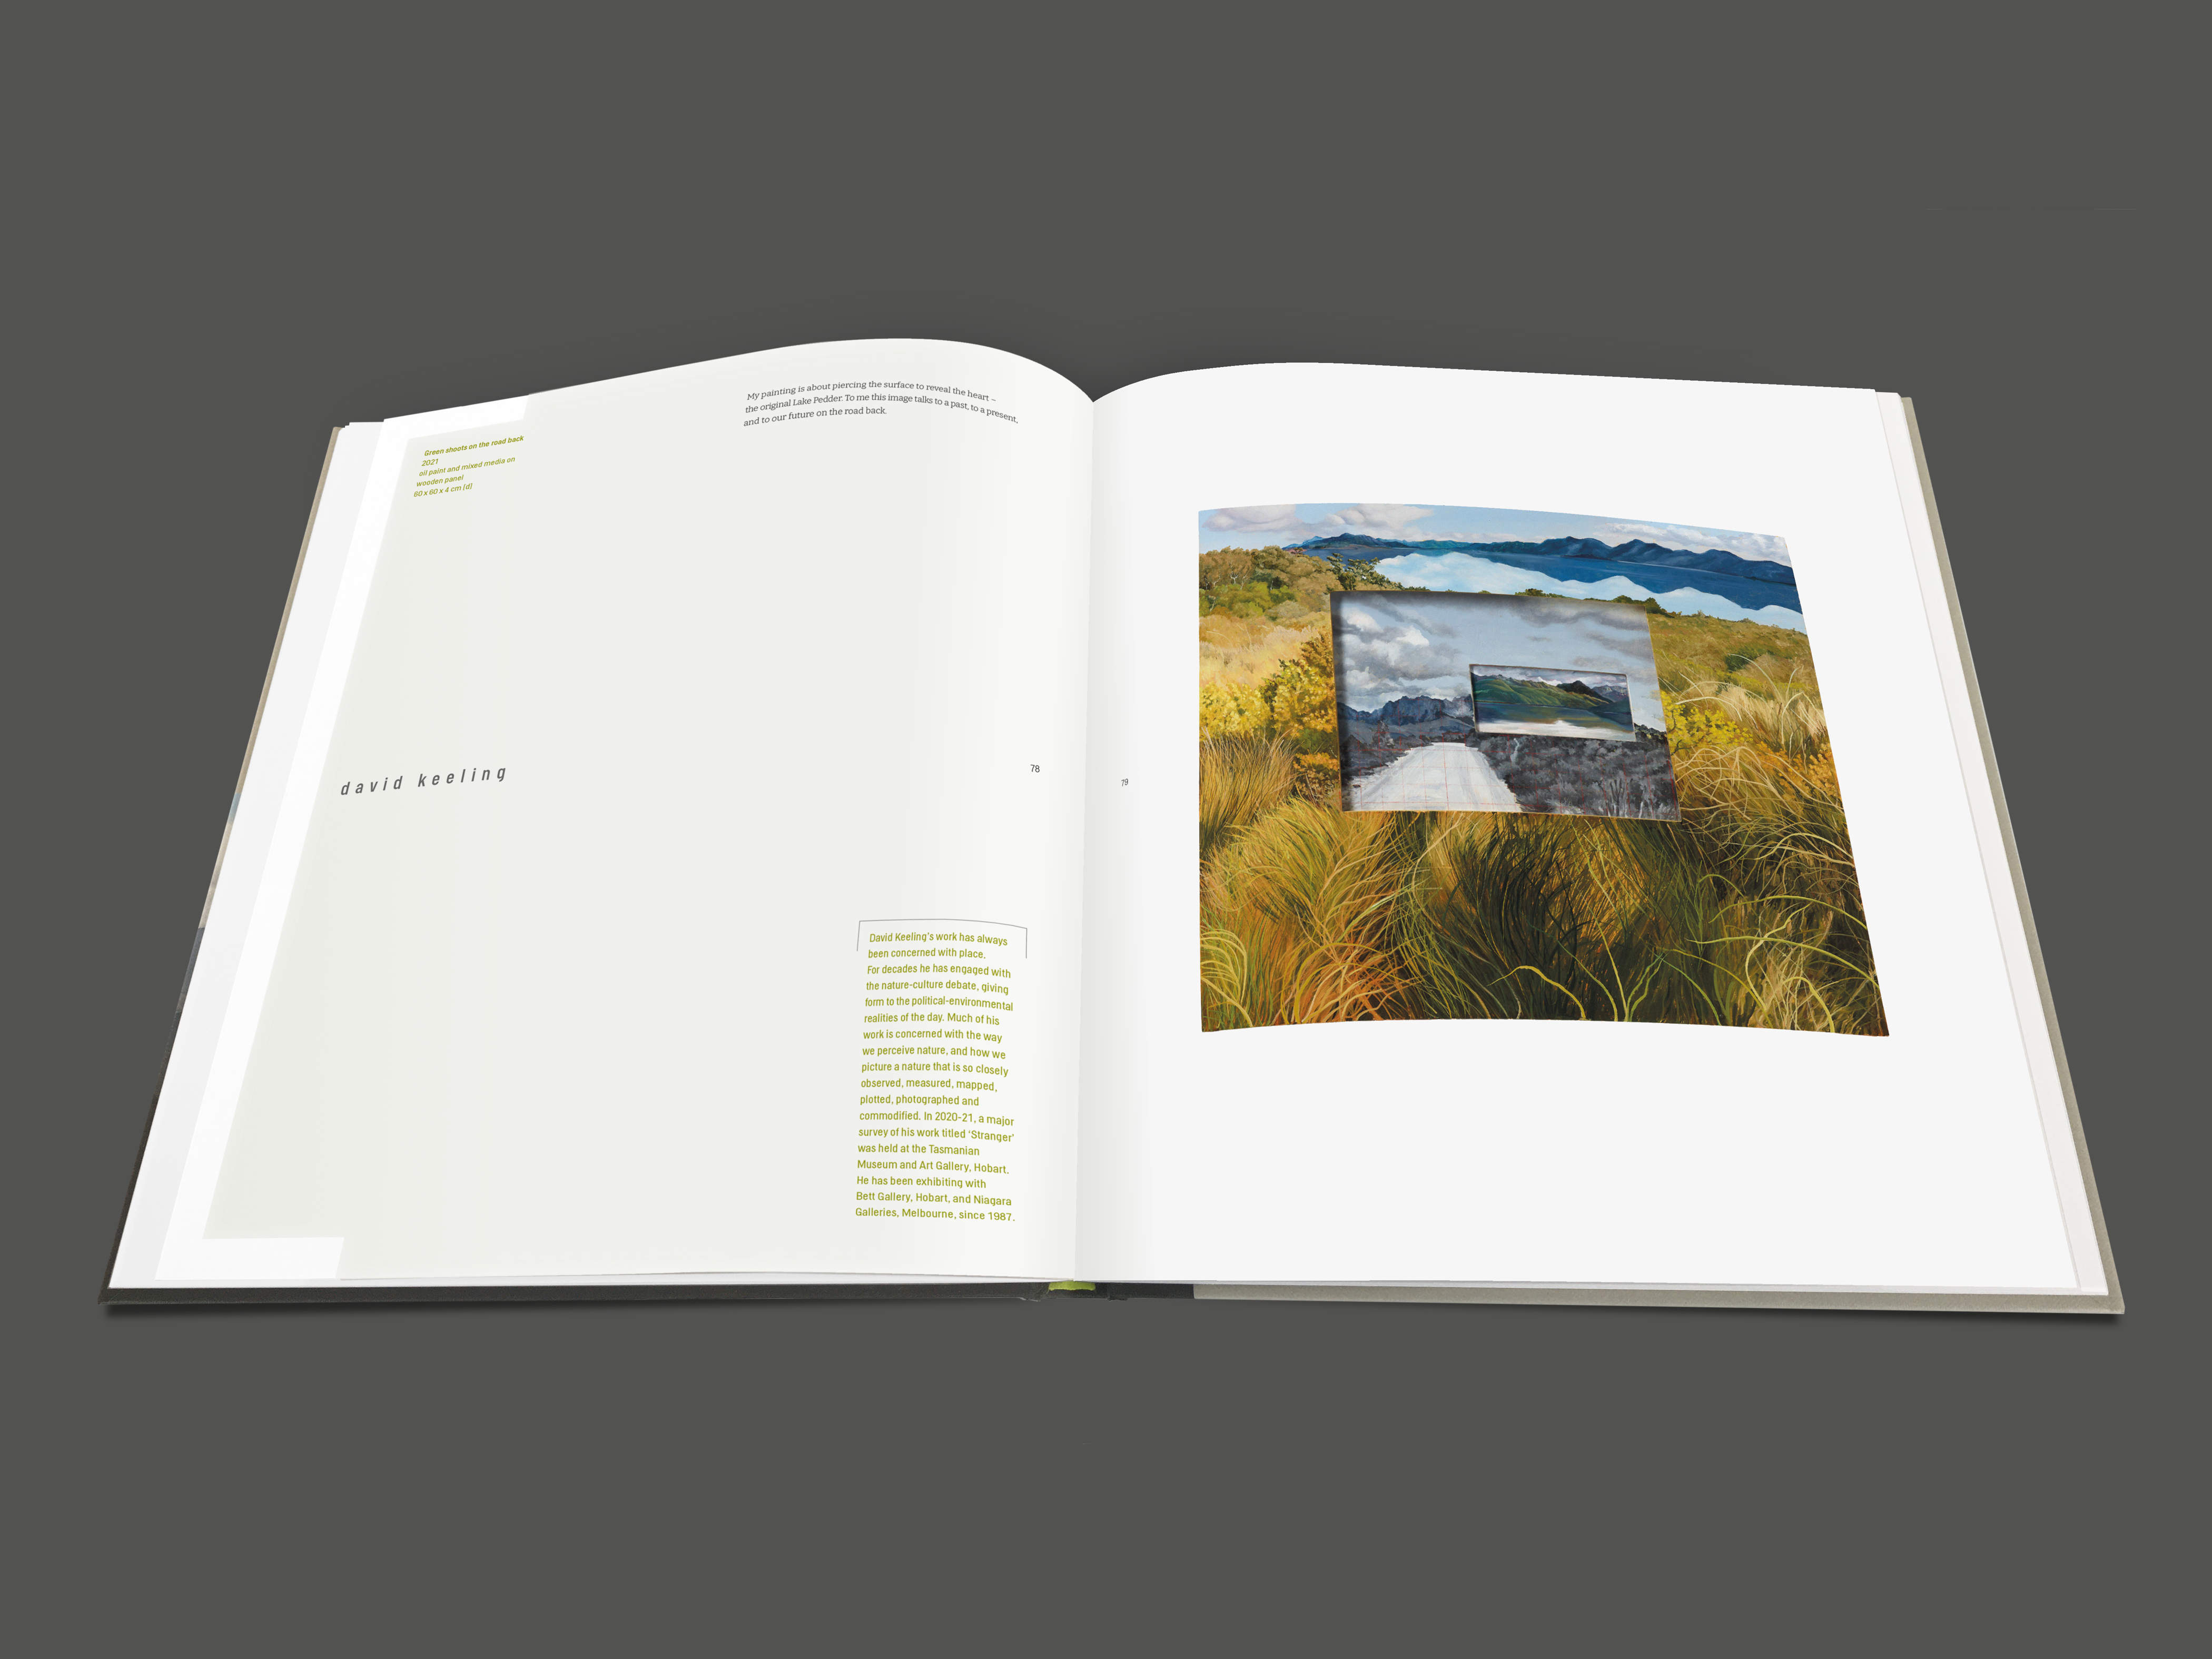 Image of a double-page spread from the water[shed] exhibition publication (pages 78 & 79). The left-hand page has an artist statement by David Keeling and details of his oil painting titled ‘Green shoots on the road back’ (2021). The right-hand page features David’s painting, which depicts three different landscape scenes. The main scene depicts the drowned landscape. The middle scene shows a section of the unsealed Scotts Peak Road with a topographic map grid overlay and rugged mountain ranges in the background. This references an earlier work titled, ‘The road back (inset after Olegas Truchanas)’ (2021). The third scene is a small inset image depicting the shallow water and beach of the original Lake Pedder before it was flooded.